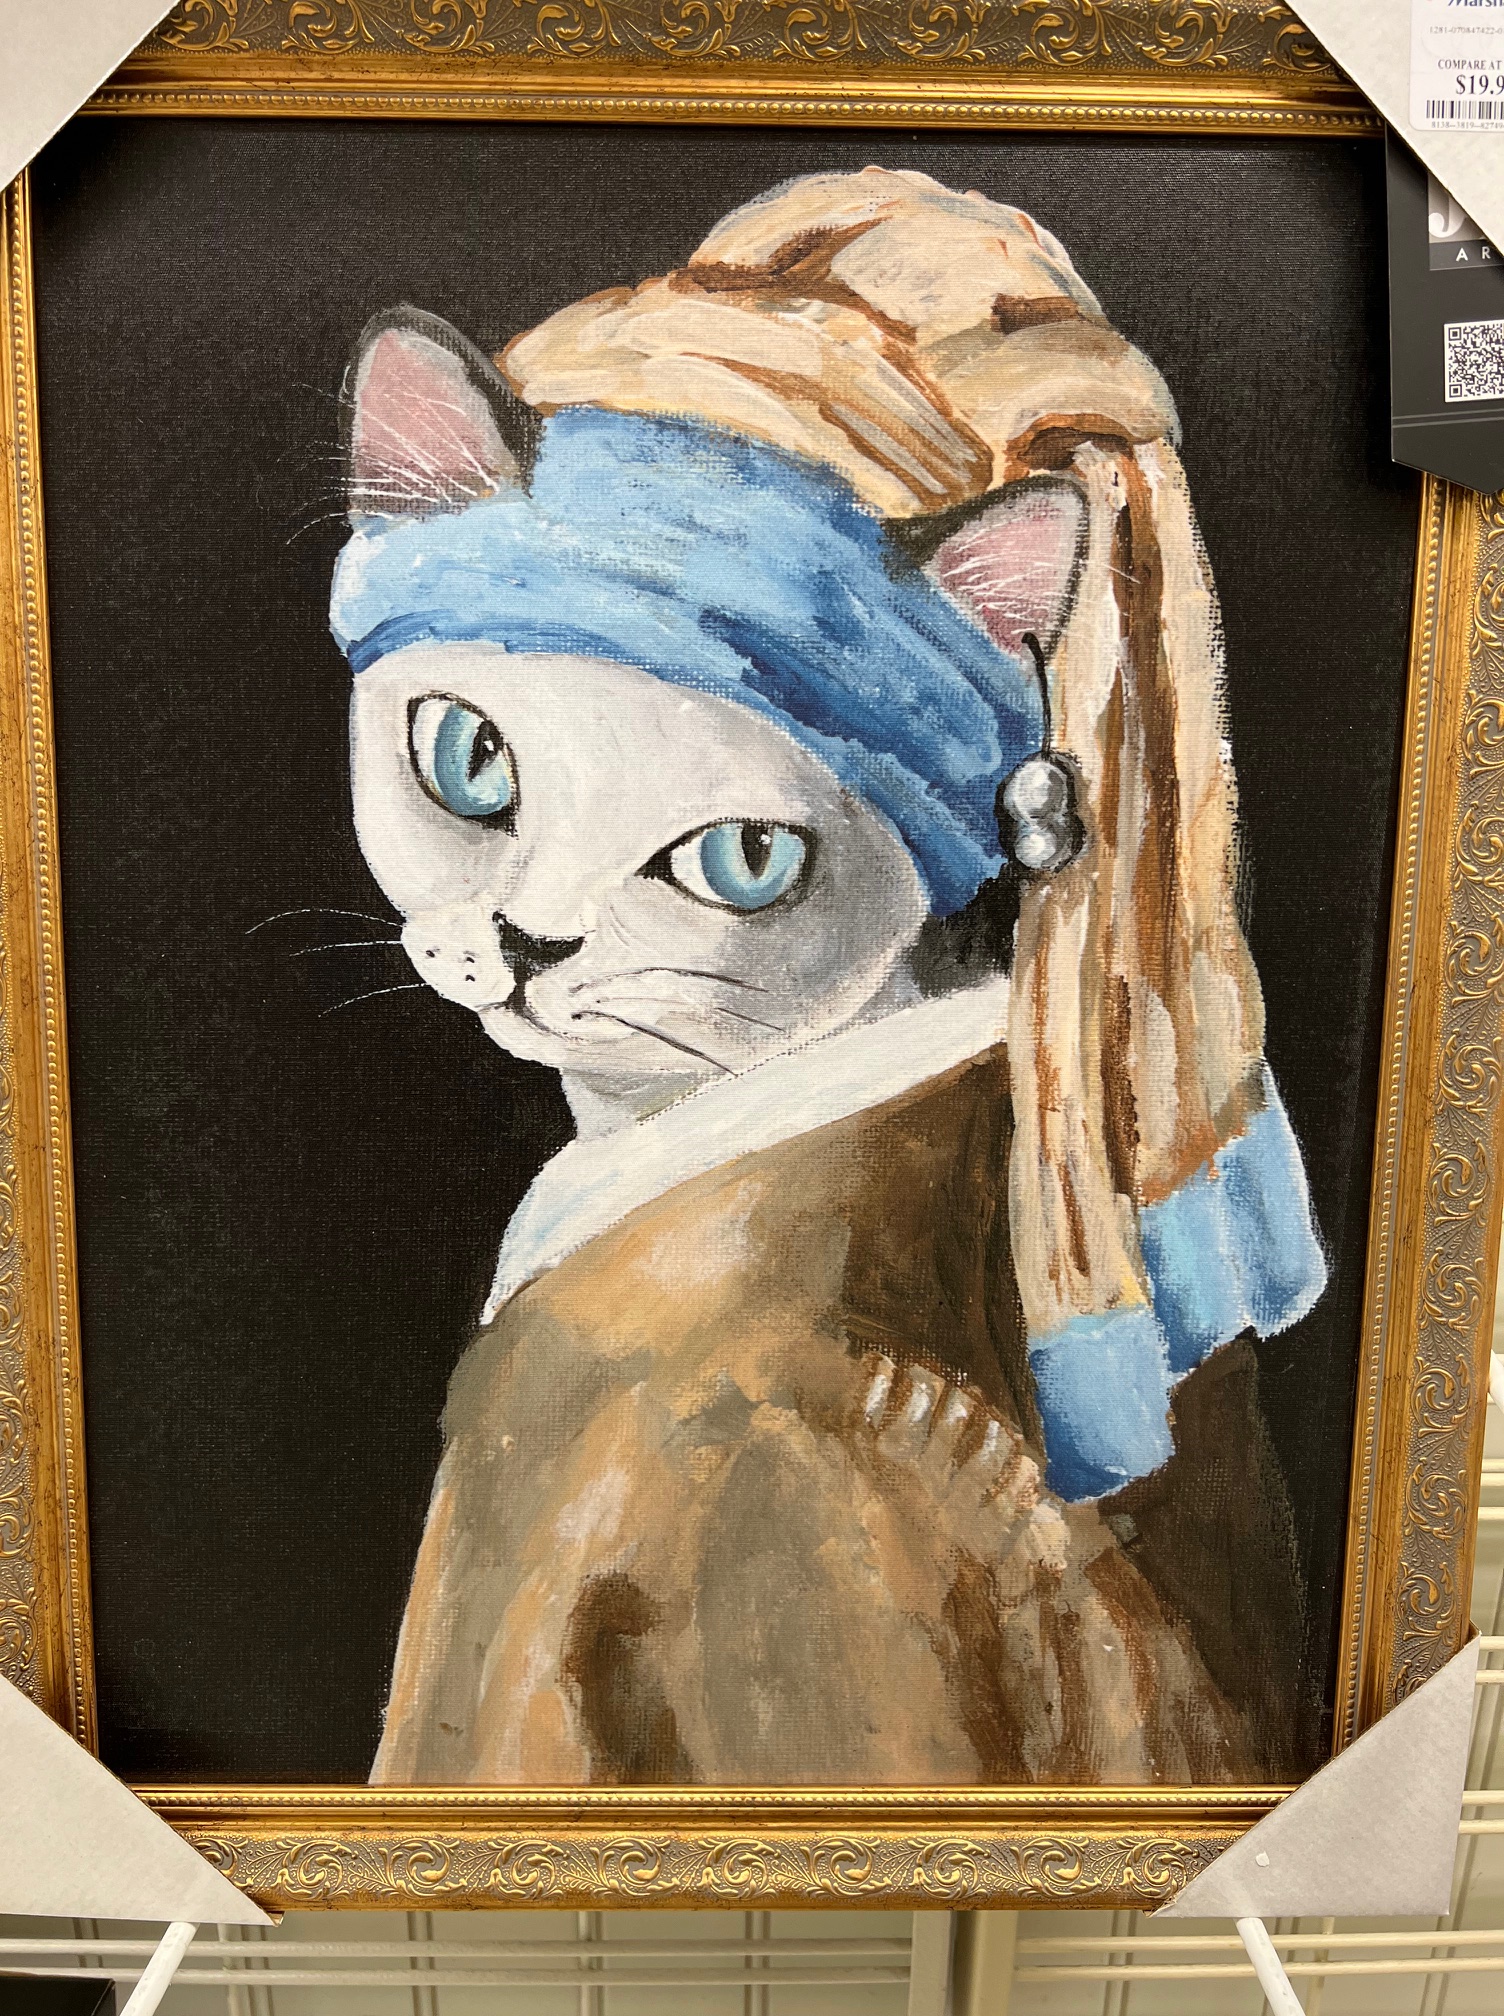 Siamese cat art that looks like the classic Girl with an Earring